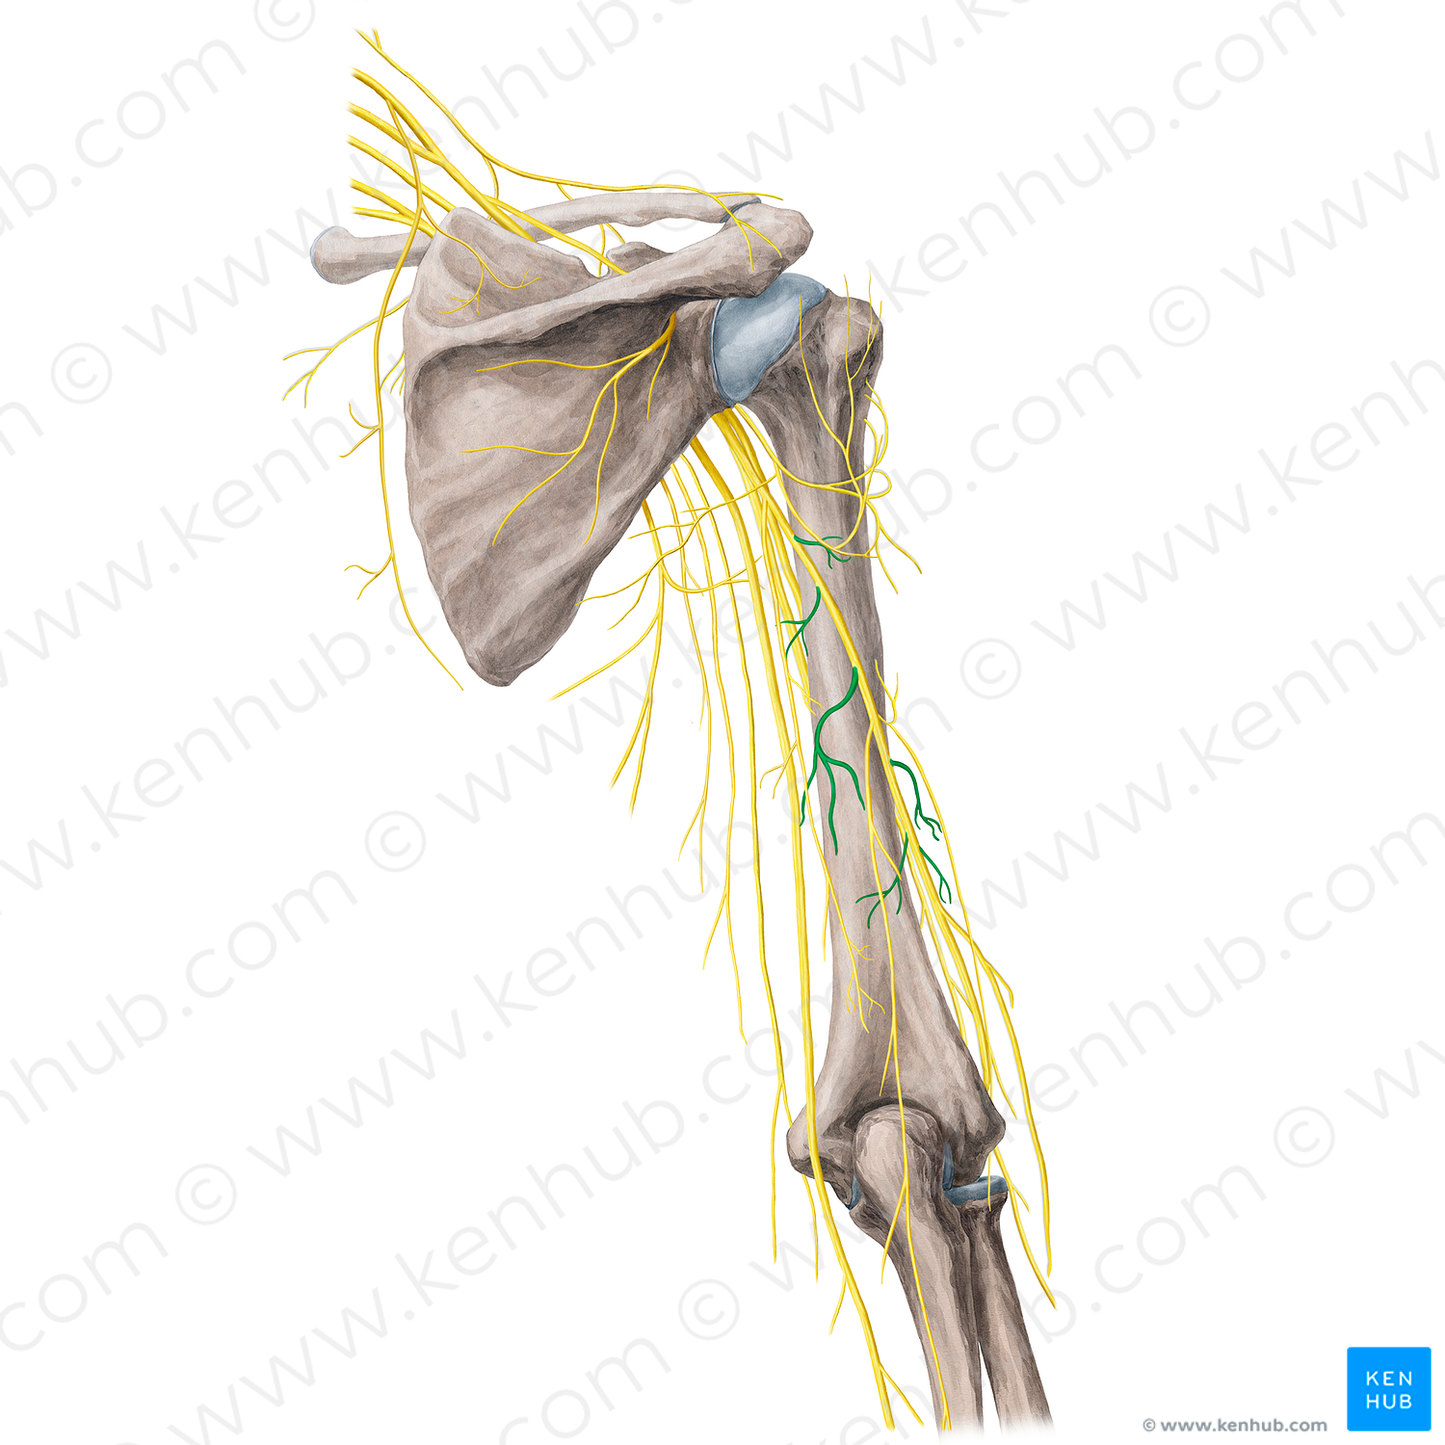 Muscular branches of radial nerve (#21765)